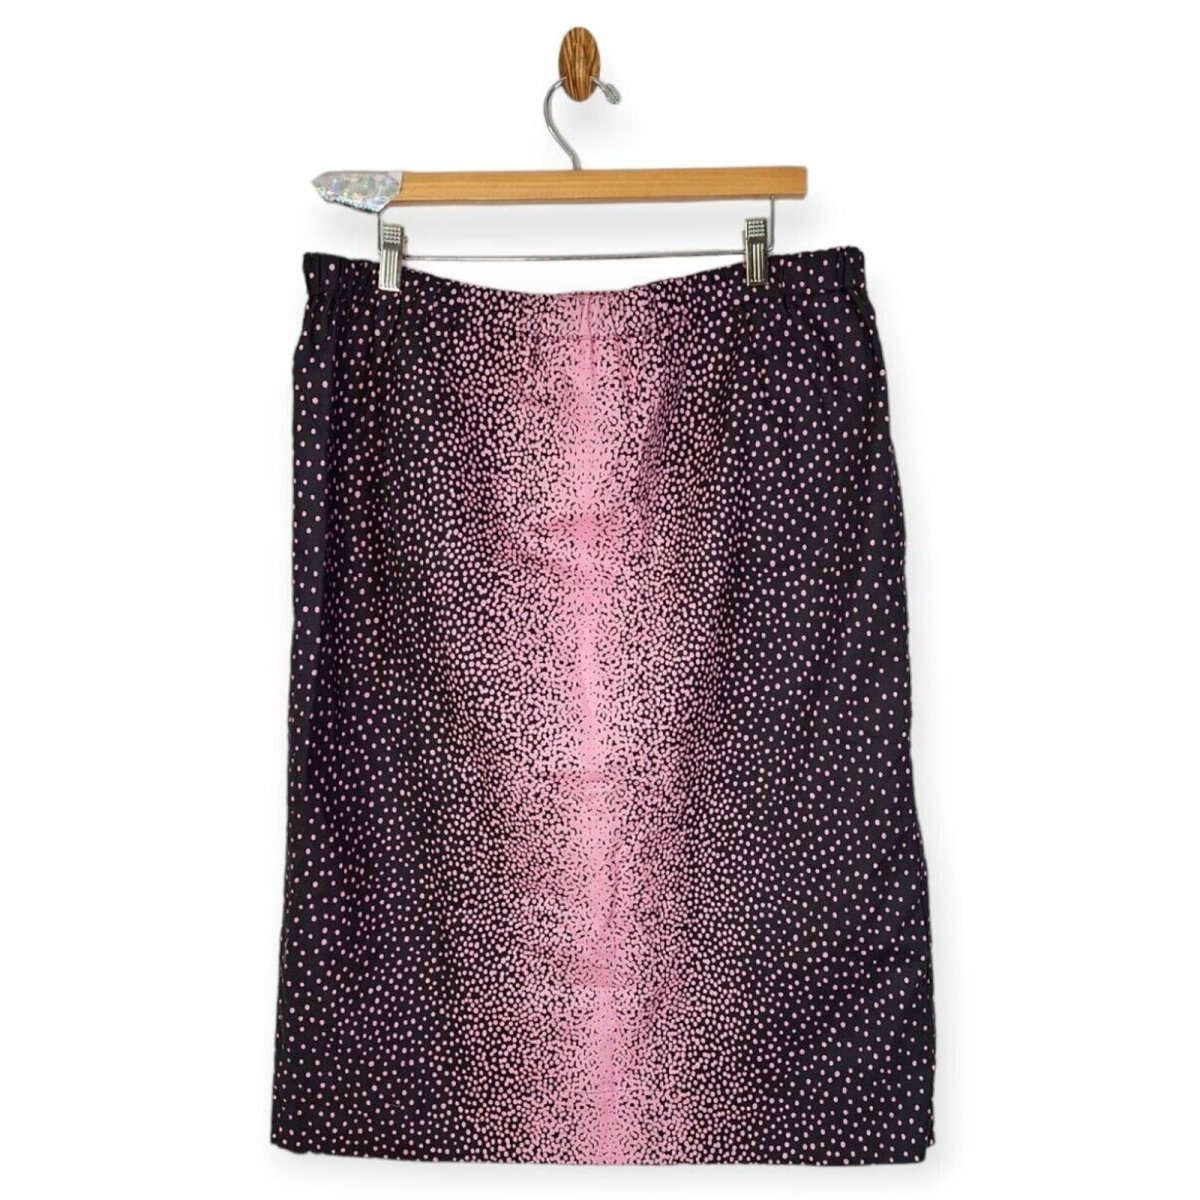 Vintage 80s Pink and Black Gradient Polka Dot Straight Midi Skirt Women's Size L/XL/1X Waist 36" to 44" - themallvintage The Mall Vintage